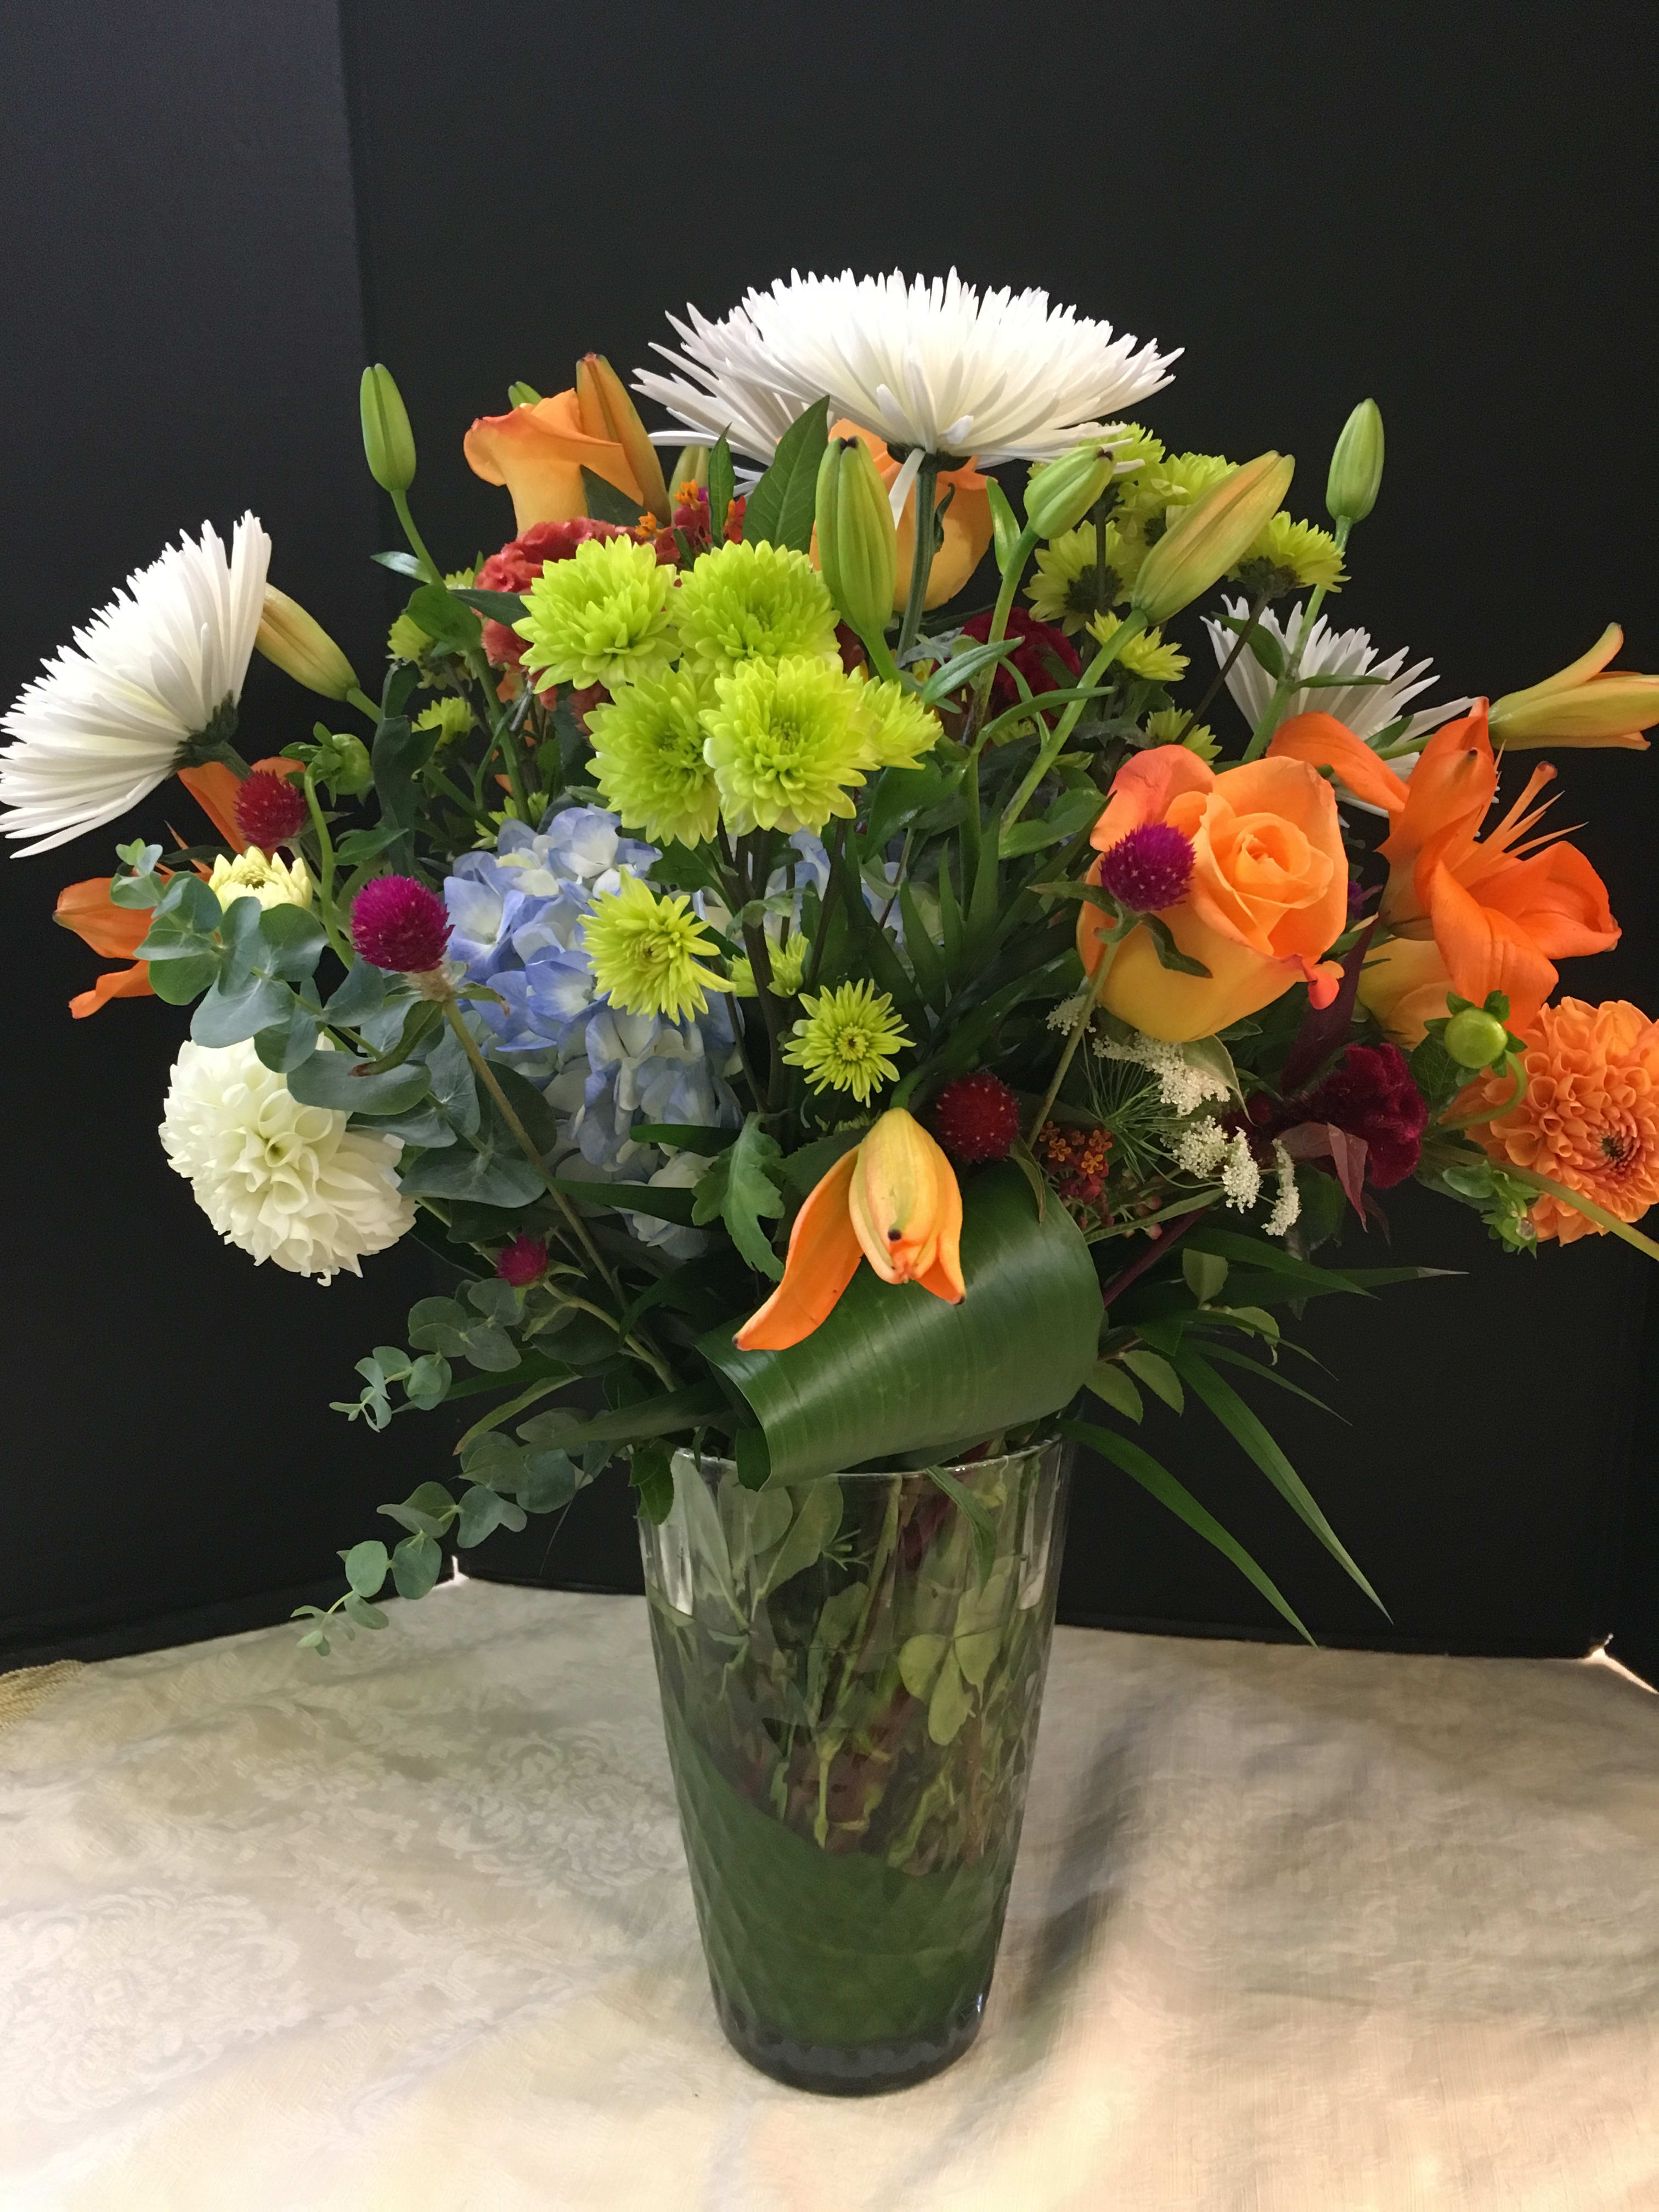 A Floral Delight for the Eye (Picture is Deluxe) -  Hydrangea, Asiatic Lilies, Roses, Spider Mums, Min. Sunflowers, Green Button, Coxcomb and Assorted Greens